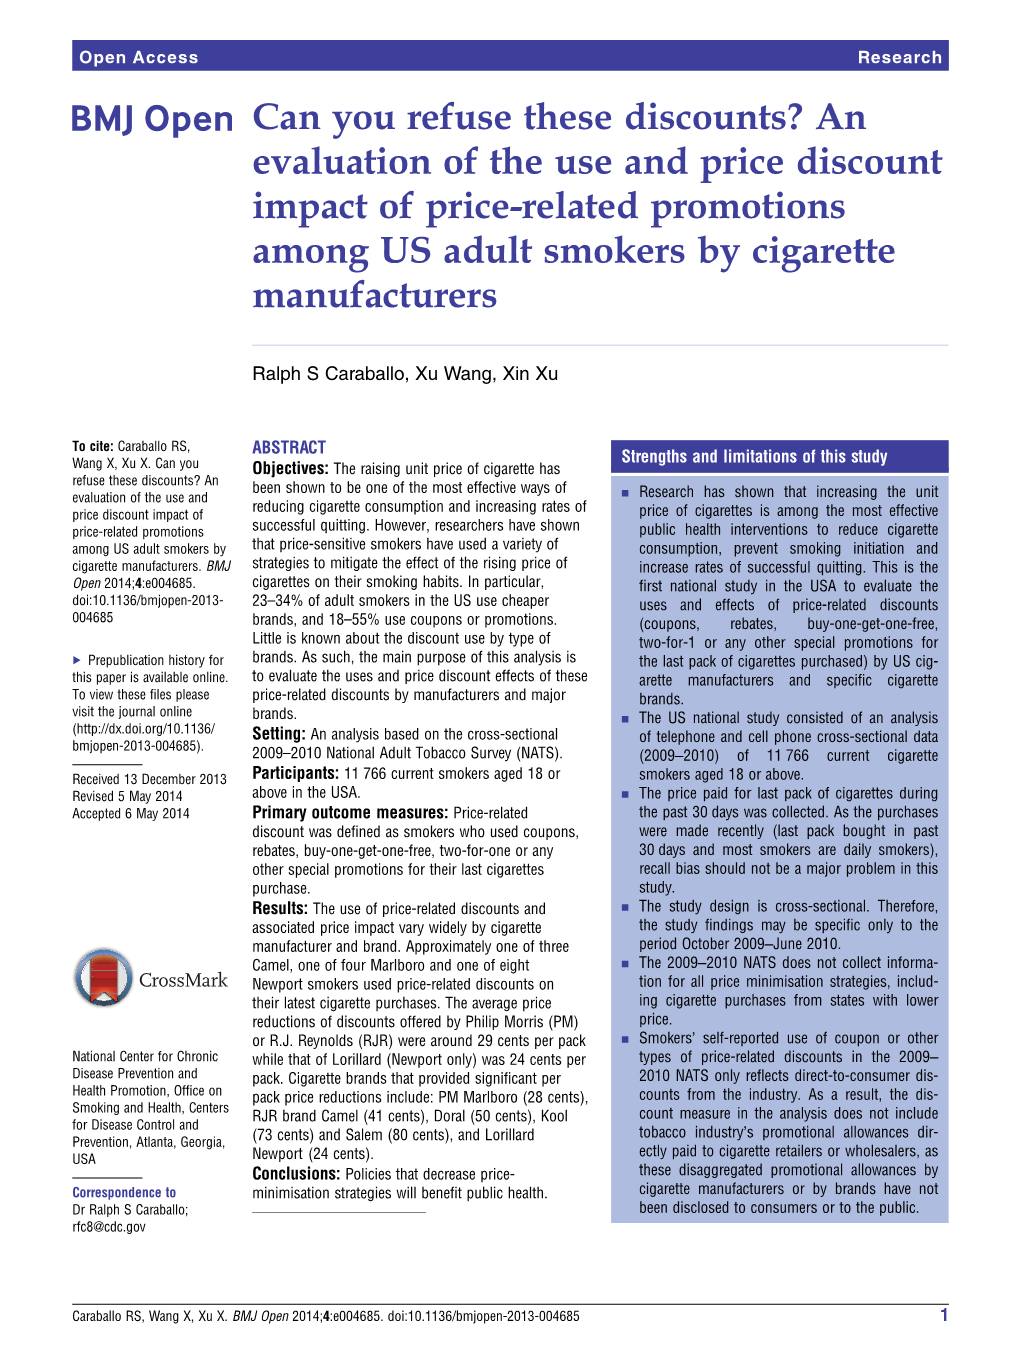 Can You Refuse These Discounts? an Evaluation of the Use and Price Discount Impact of Price-Related Promotions Among US Adult Smokers by Cigarette Manufacturers